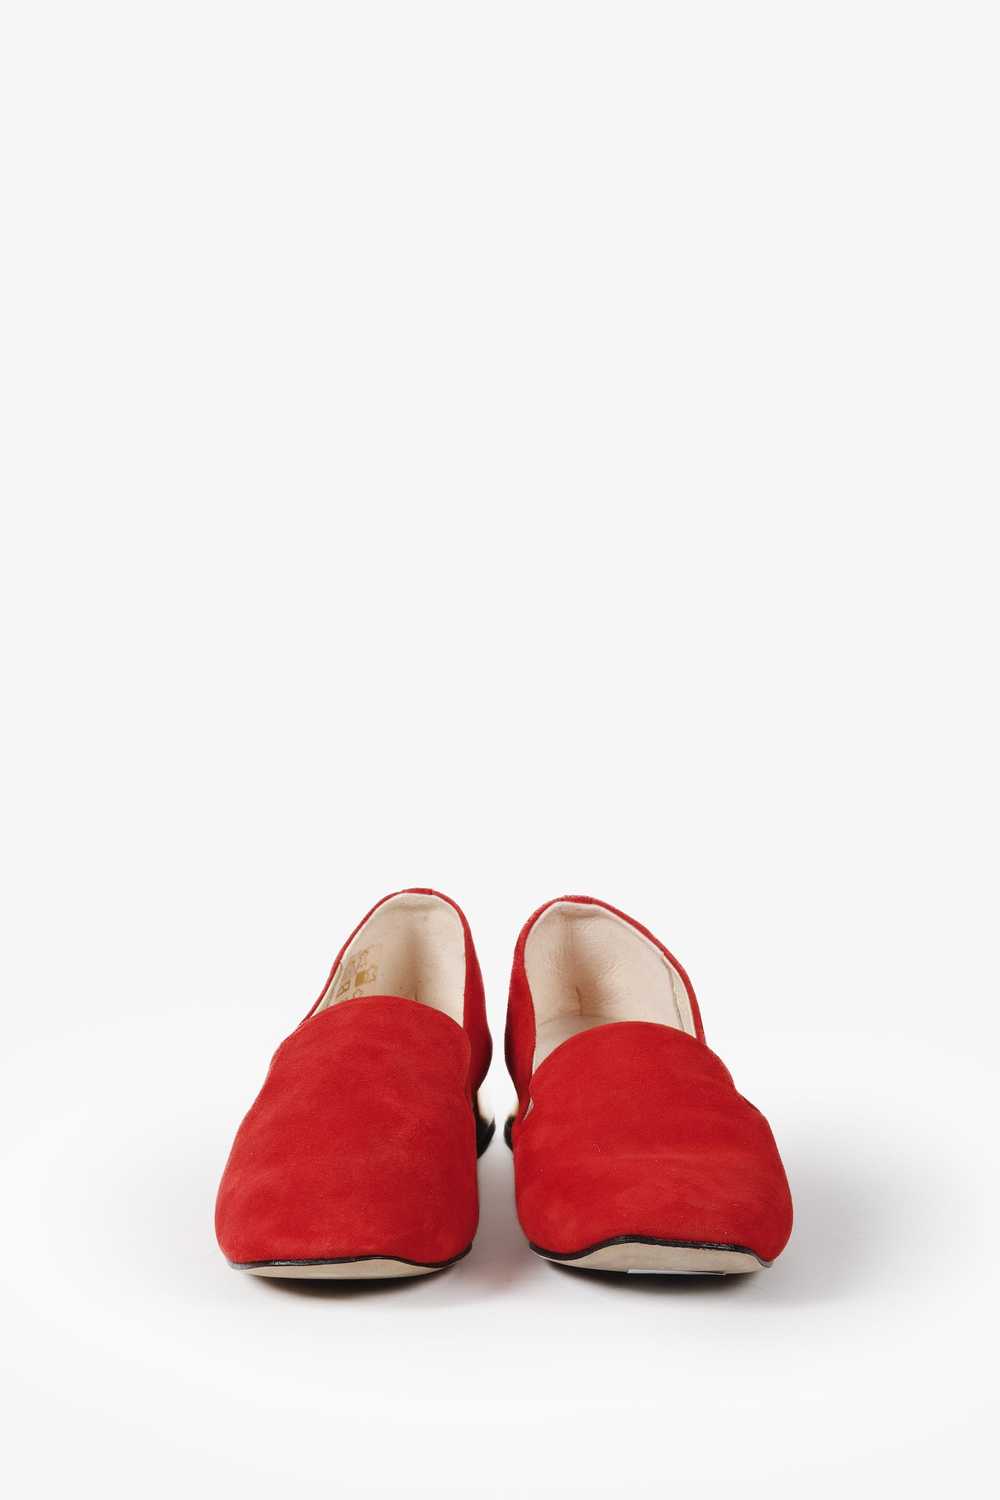 Repetto Repetto Red Suede Mathis Loafers - image 2